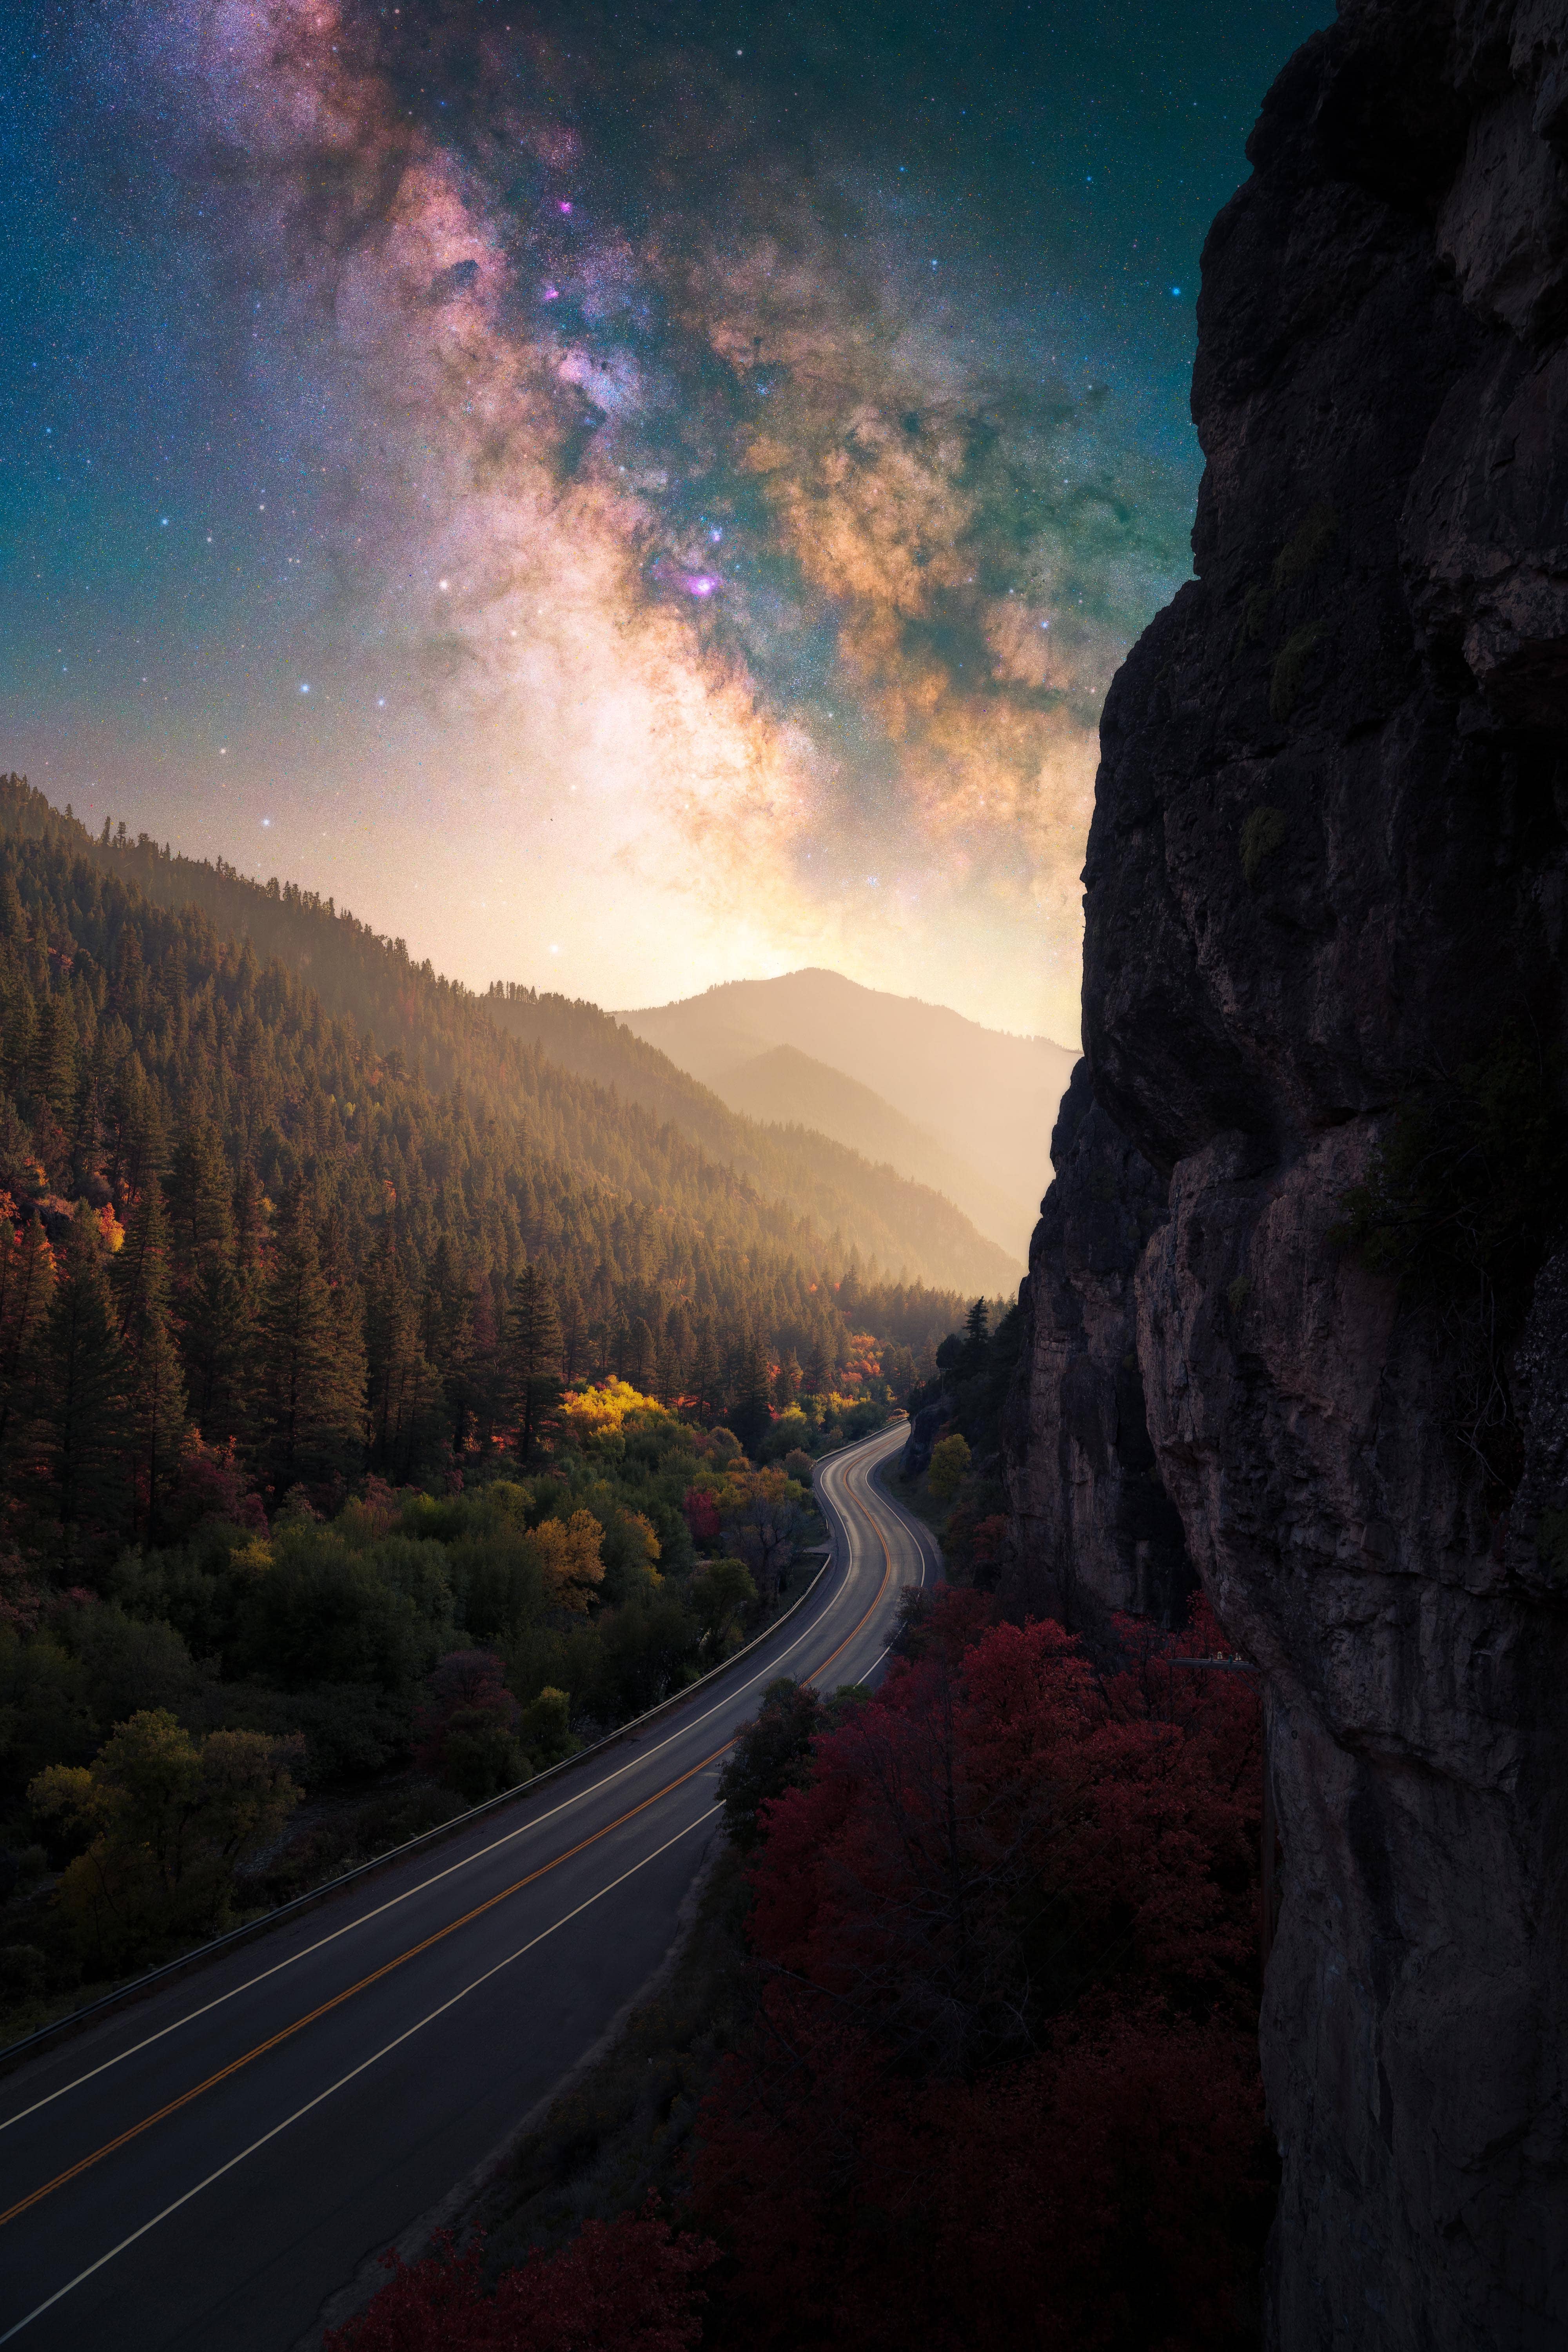 Road along a mountain with galaxy in background